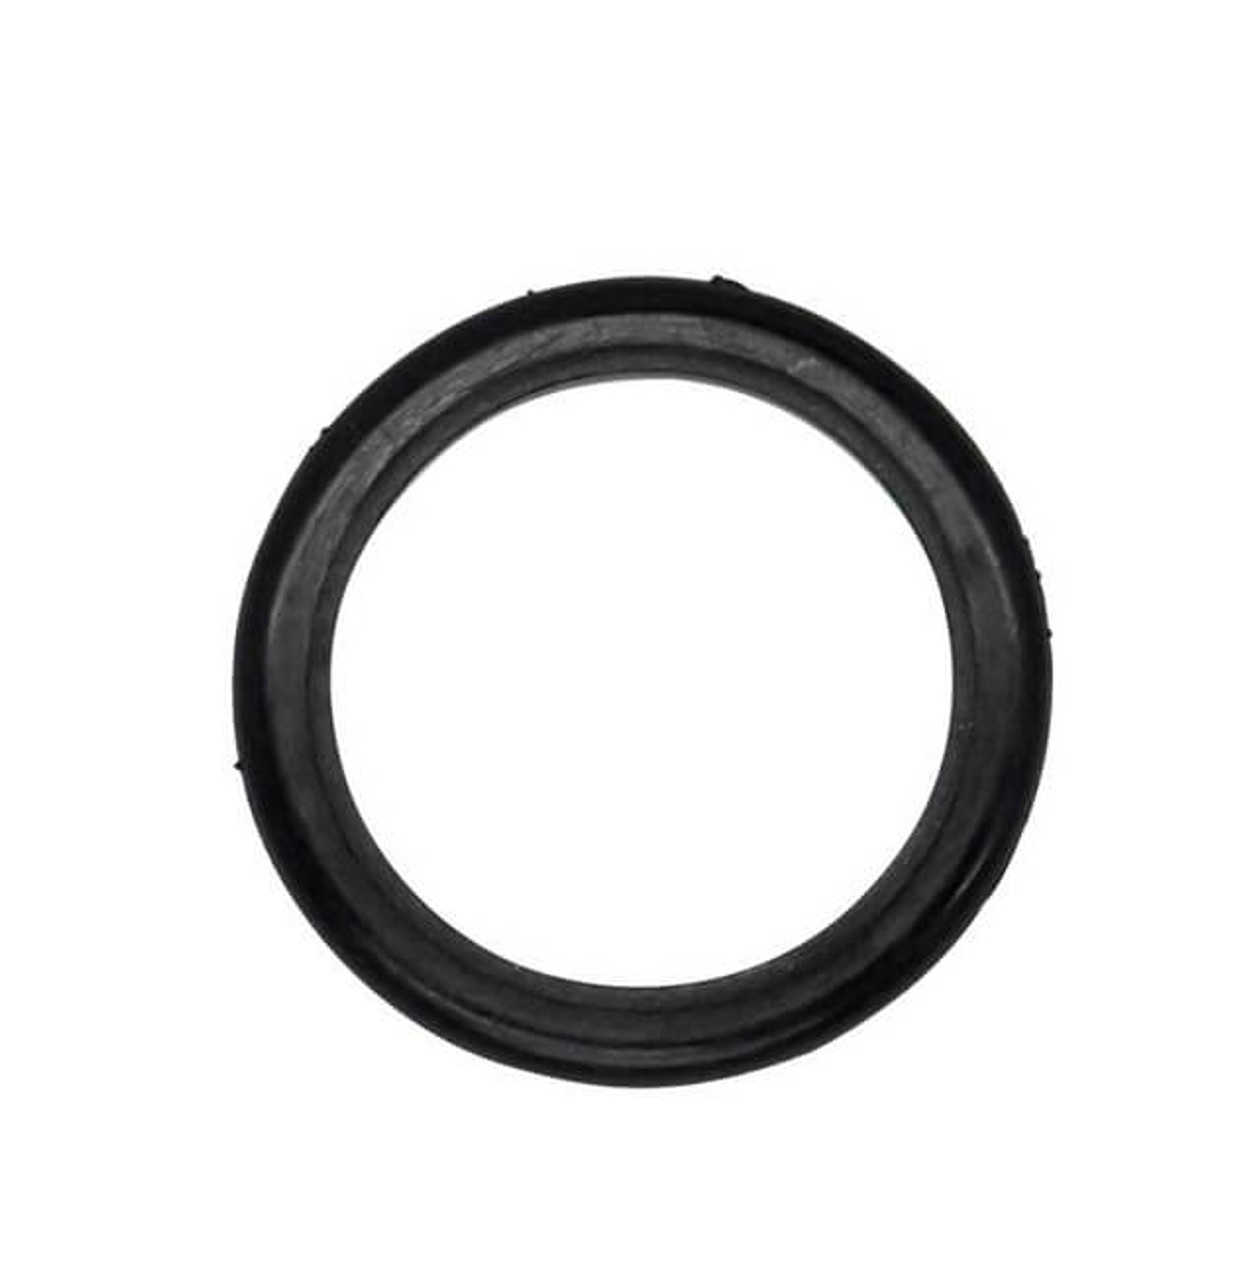 02-3210-55-225 Glyd-Ring for Wilden 1" Pumps